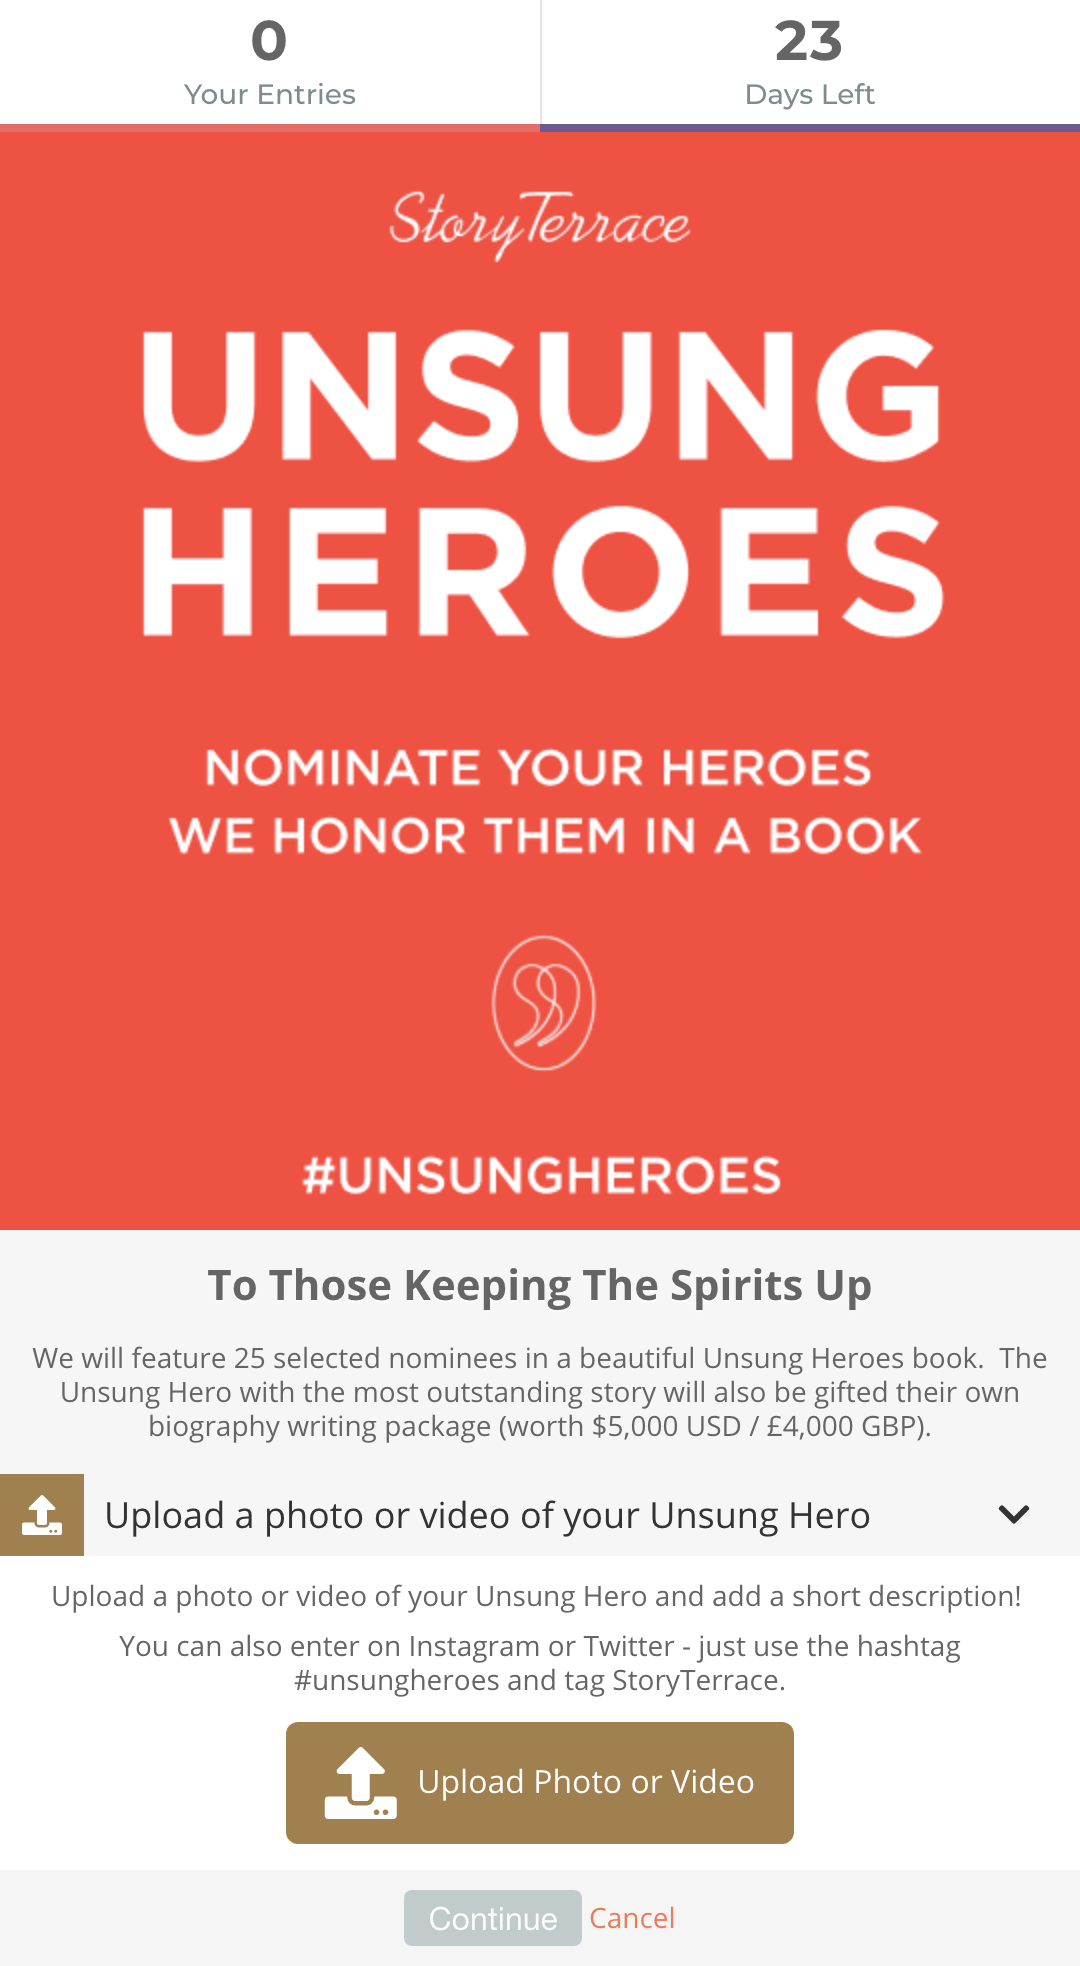 StoryTerrace's Unsung Heroes campaign